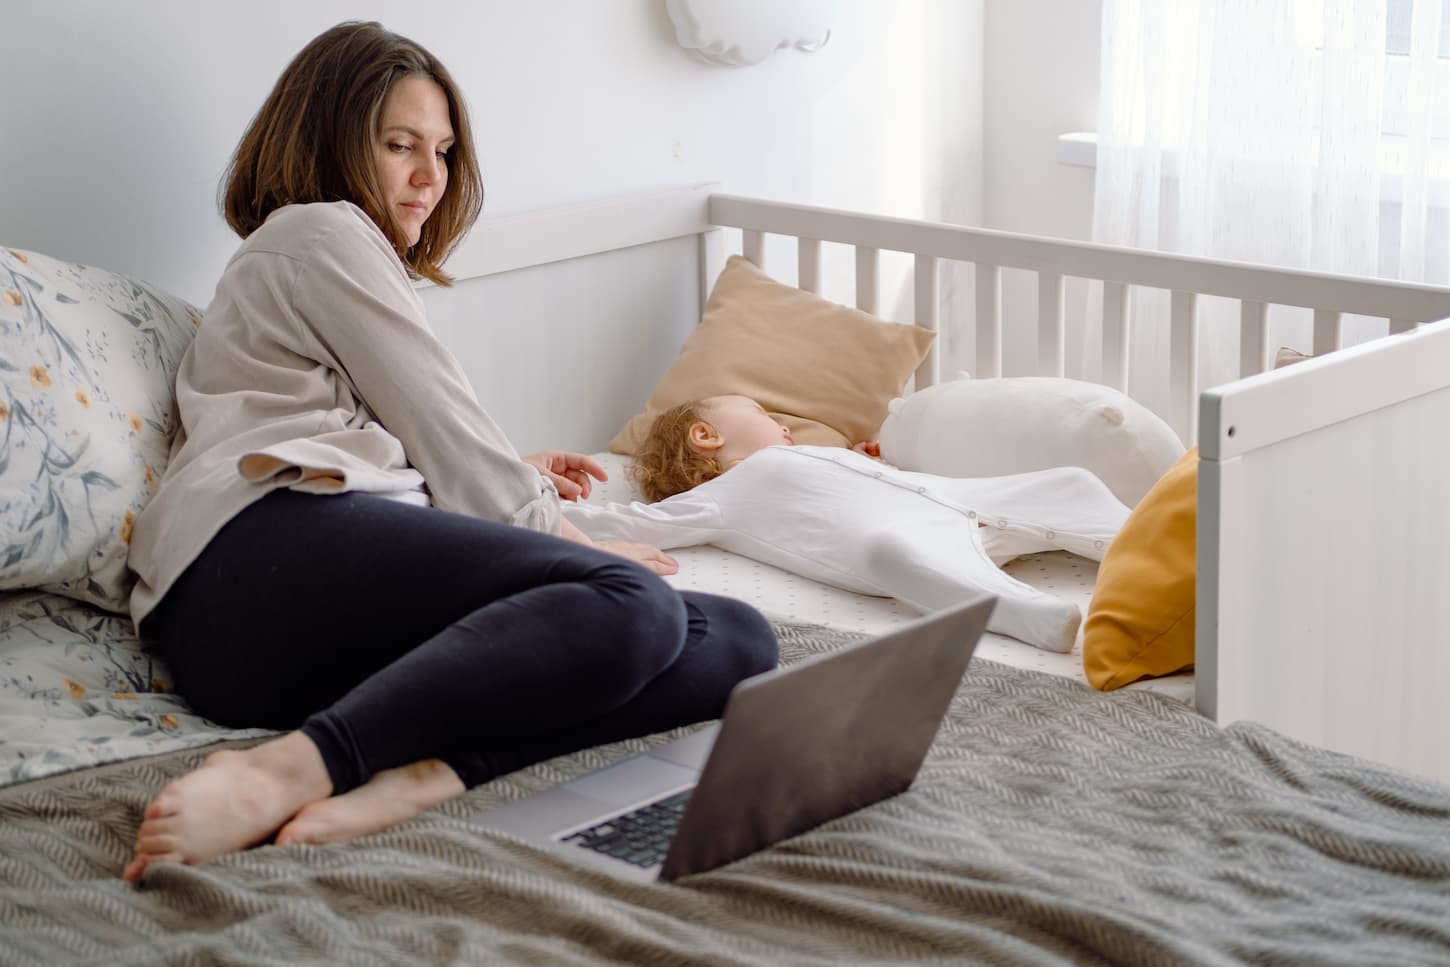 An image of a mother working on a computer or laptop while her baby is taking a daytime nap in a baby cot.